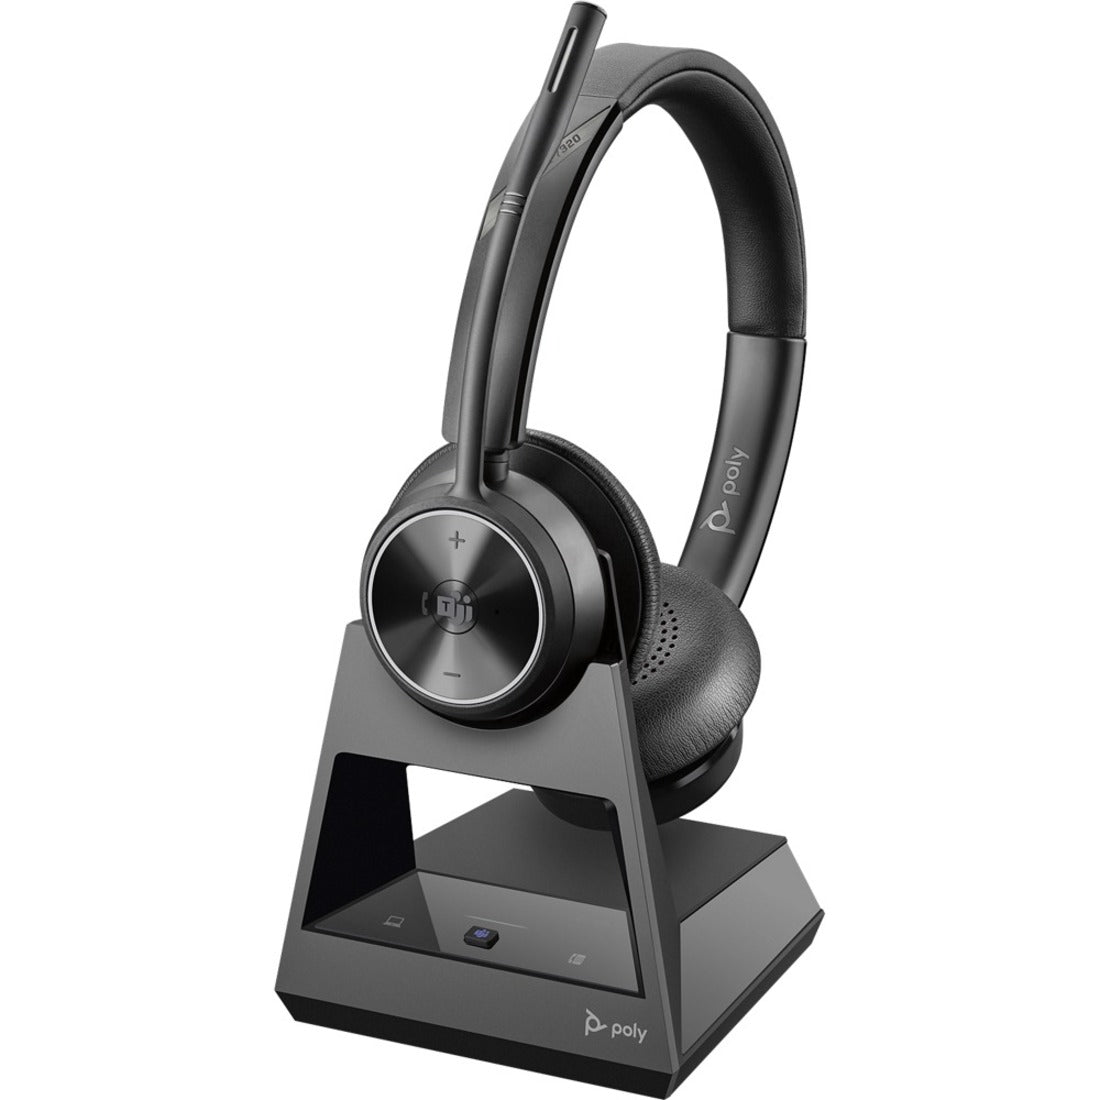 Poly 215201-01 Savi 7320 Office, S7320-M CD, Stereo Headset, Wireless DECT 6.0